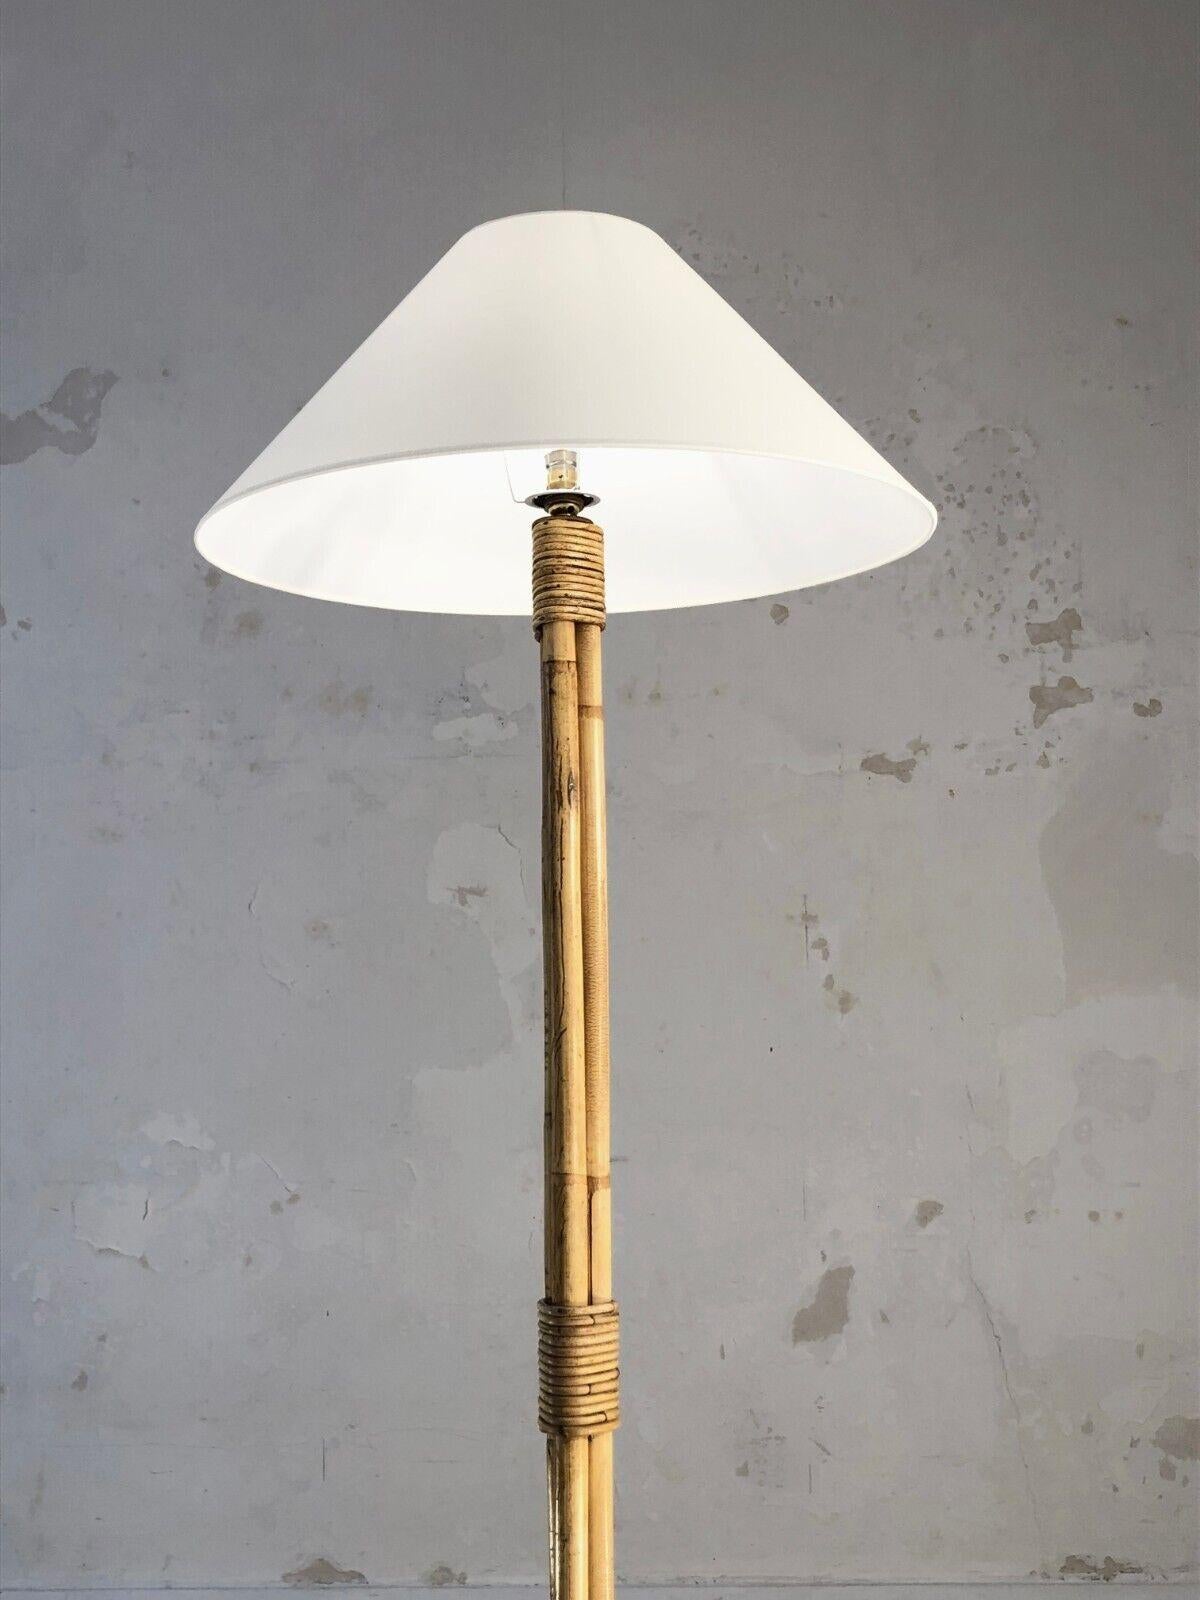 Mid-20th Century A MODERNIST TRIPOD Bamboo FLOOR LAMP, AUDOUX-MINNET & SOGNOT Style, France 1950 For Sale